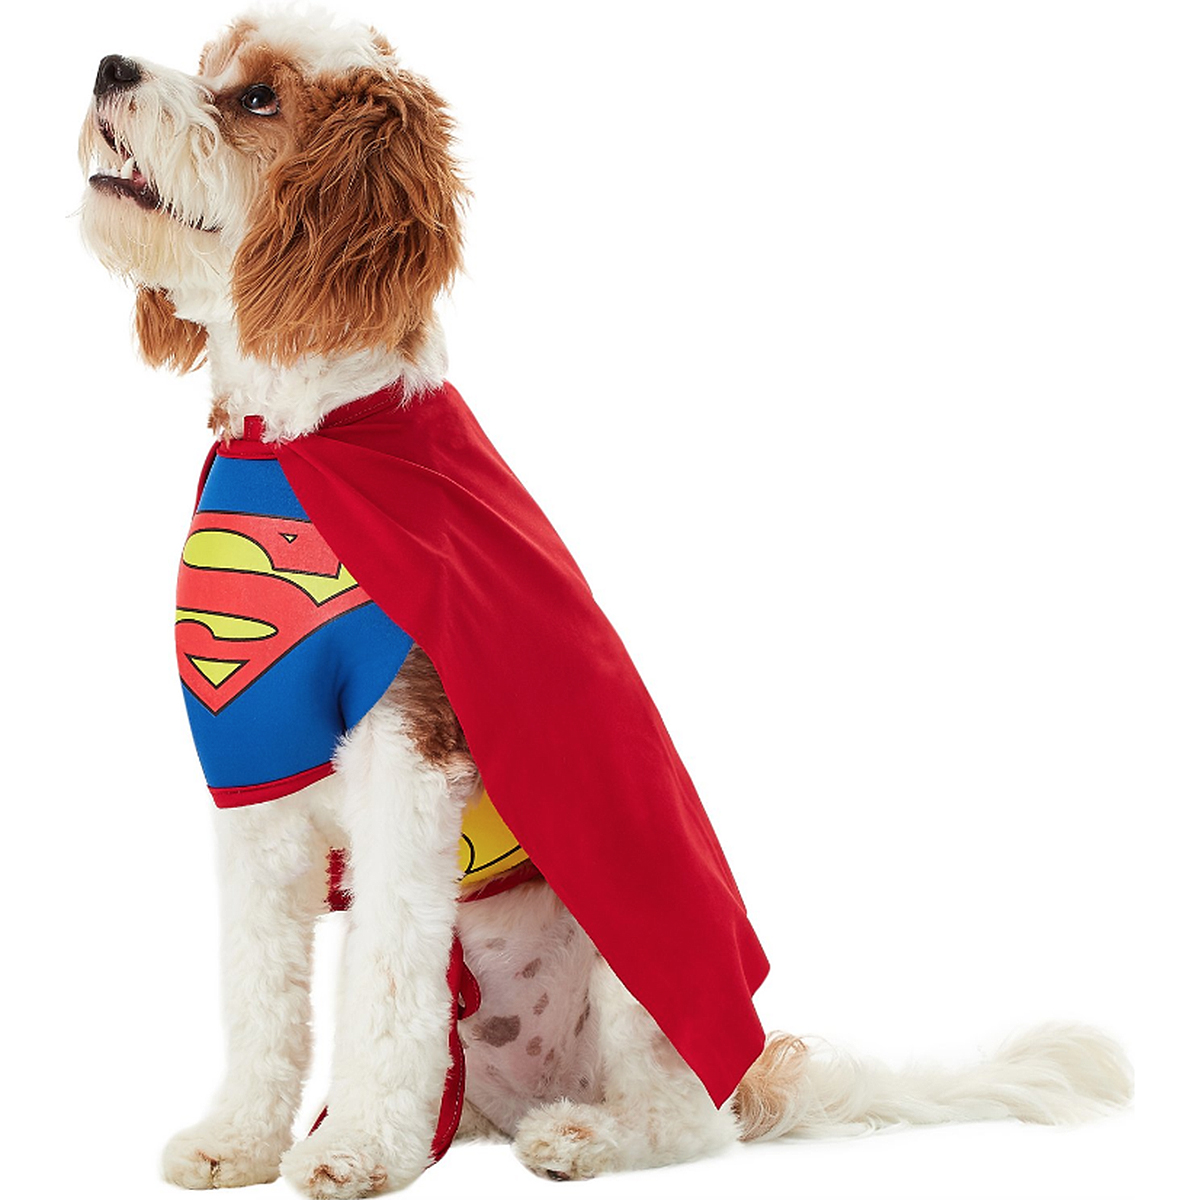 Pet Halloween Costumes: 9 of the Cutest Ever — All on Sale!